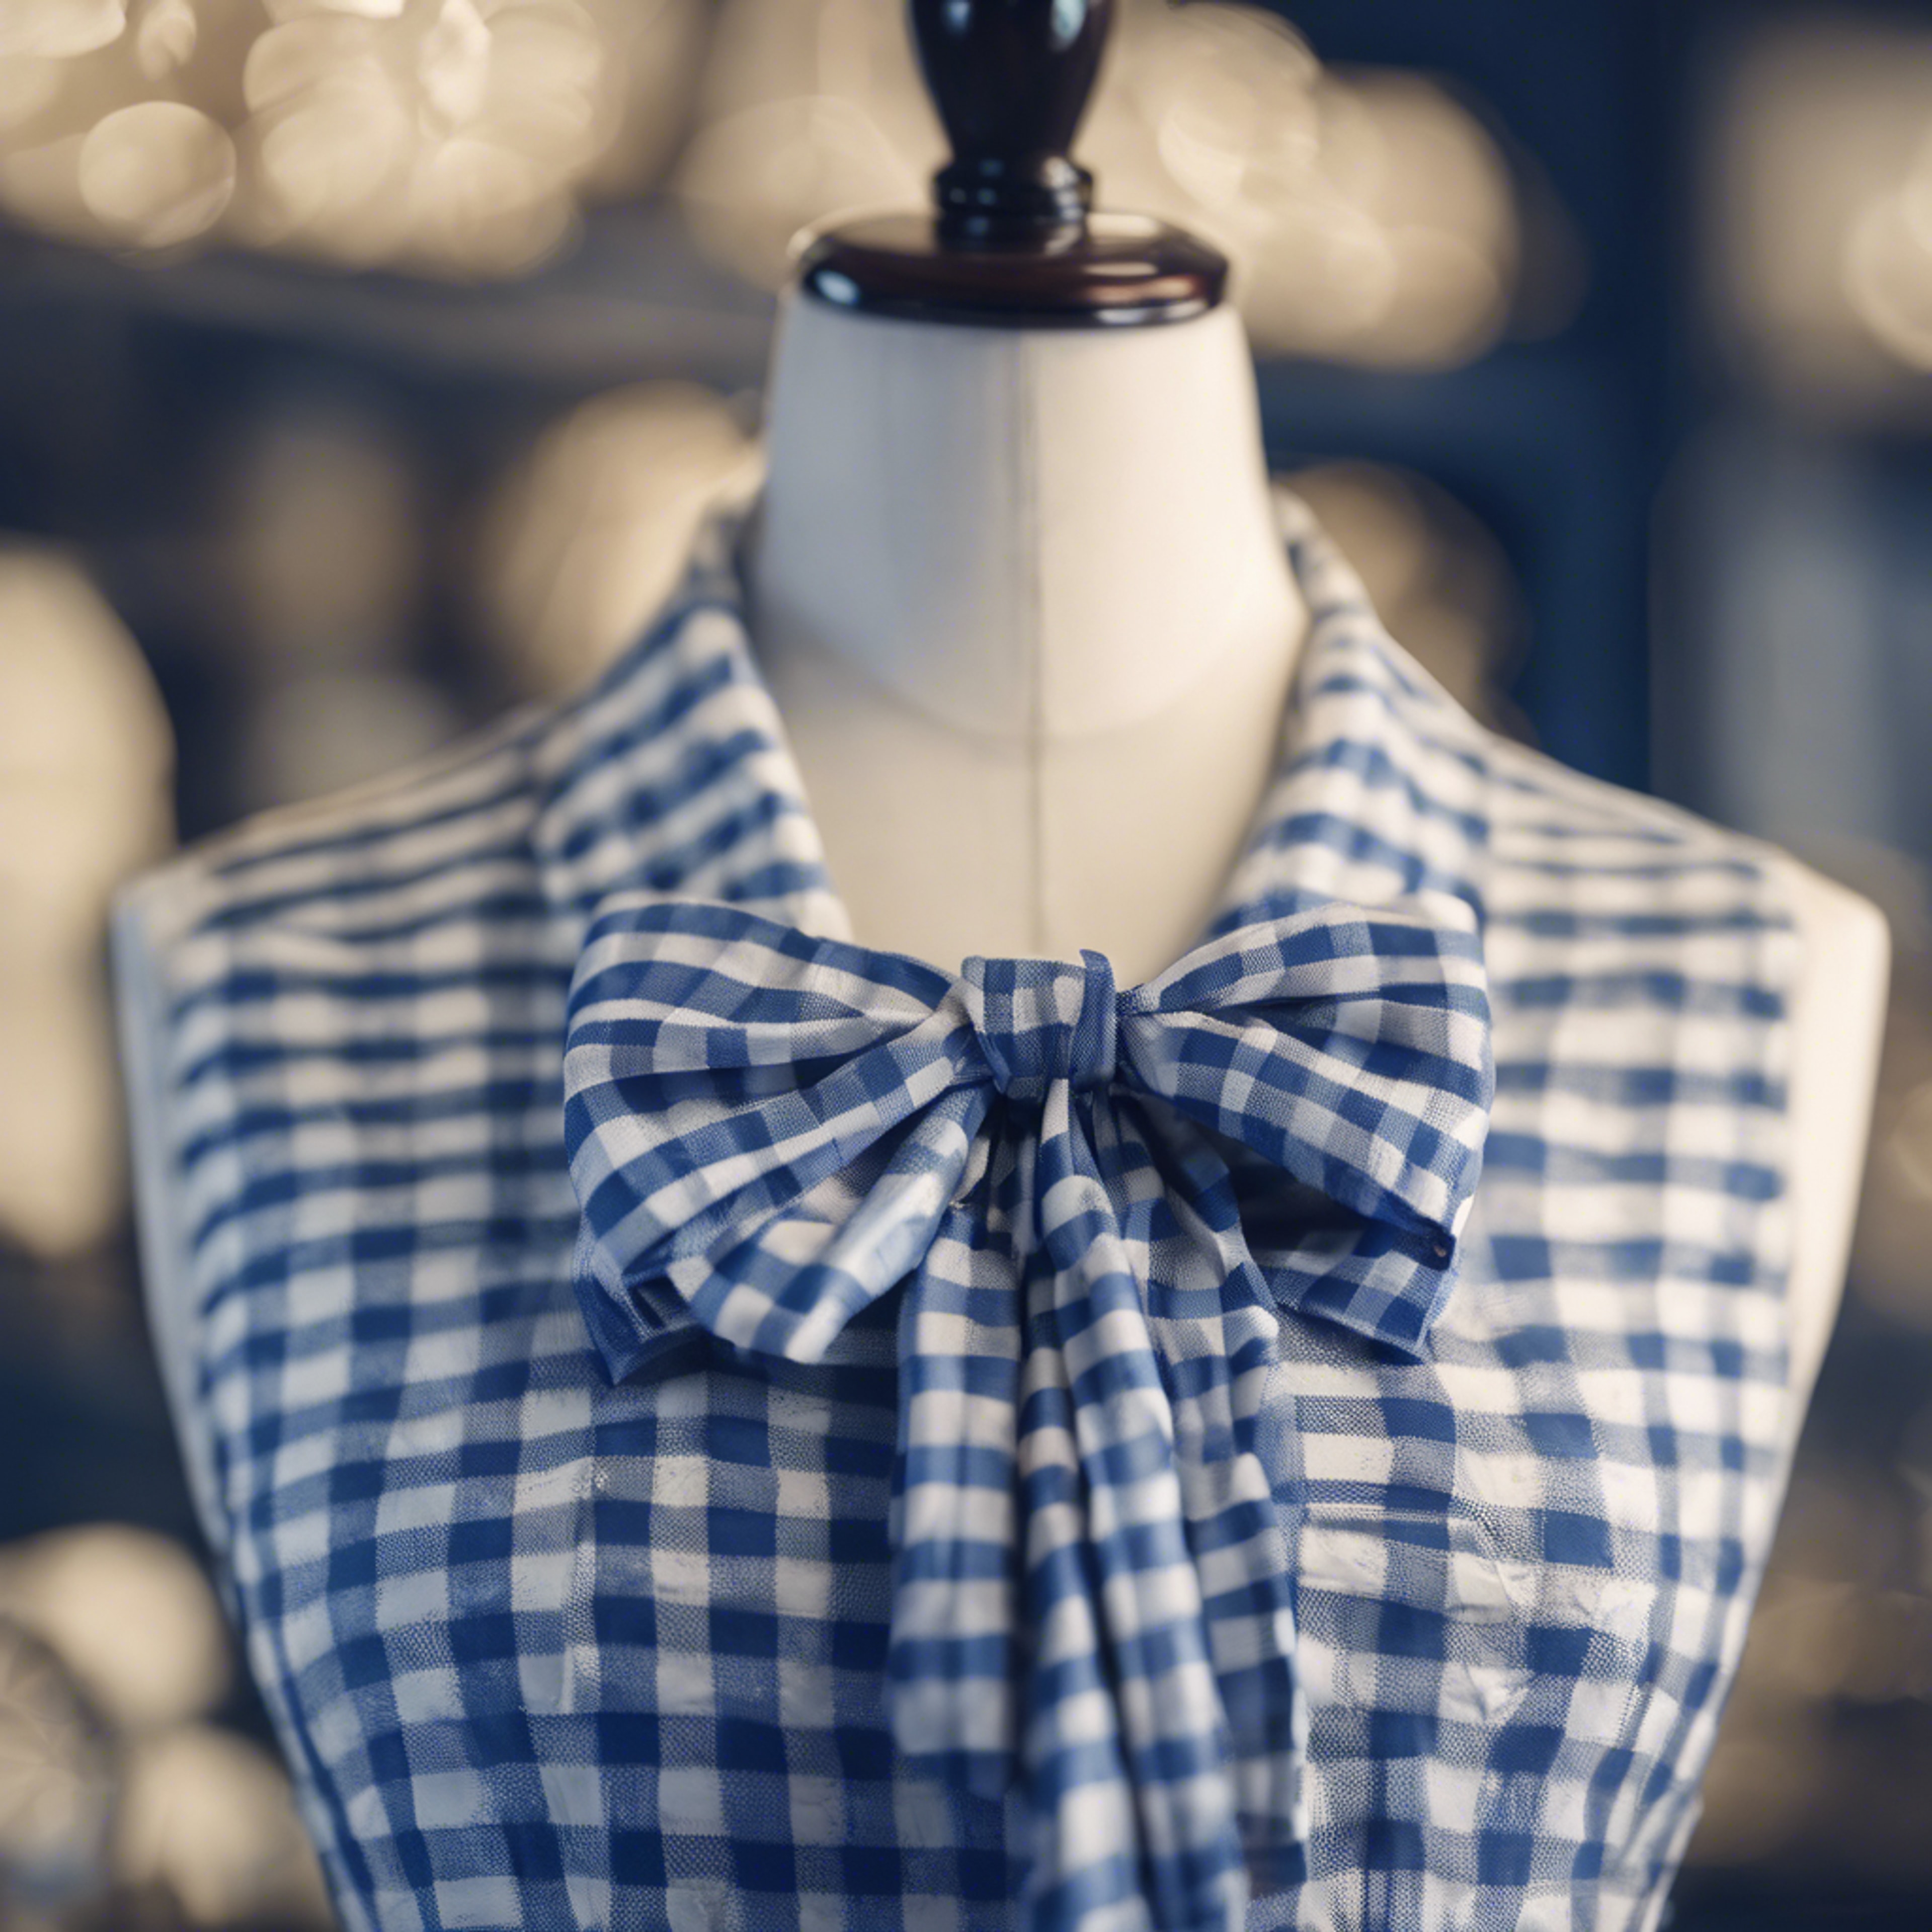 A preppy style blue and white chequered dress with a neatly tied bow on a mannequin.” کاغذ دیواری[2cff79e4d79d40c780d3]